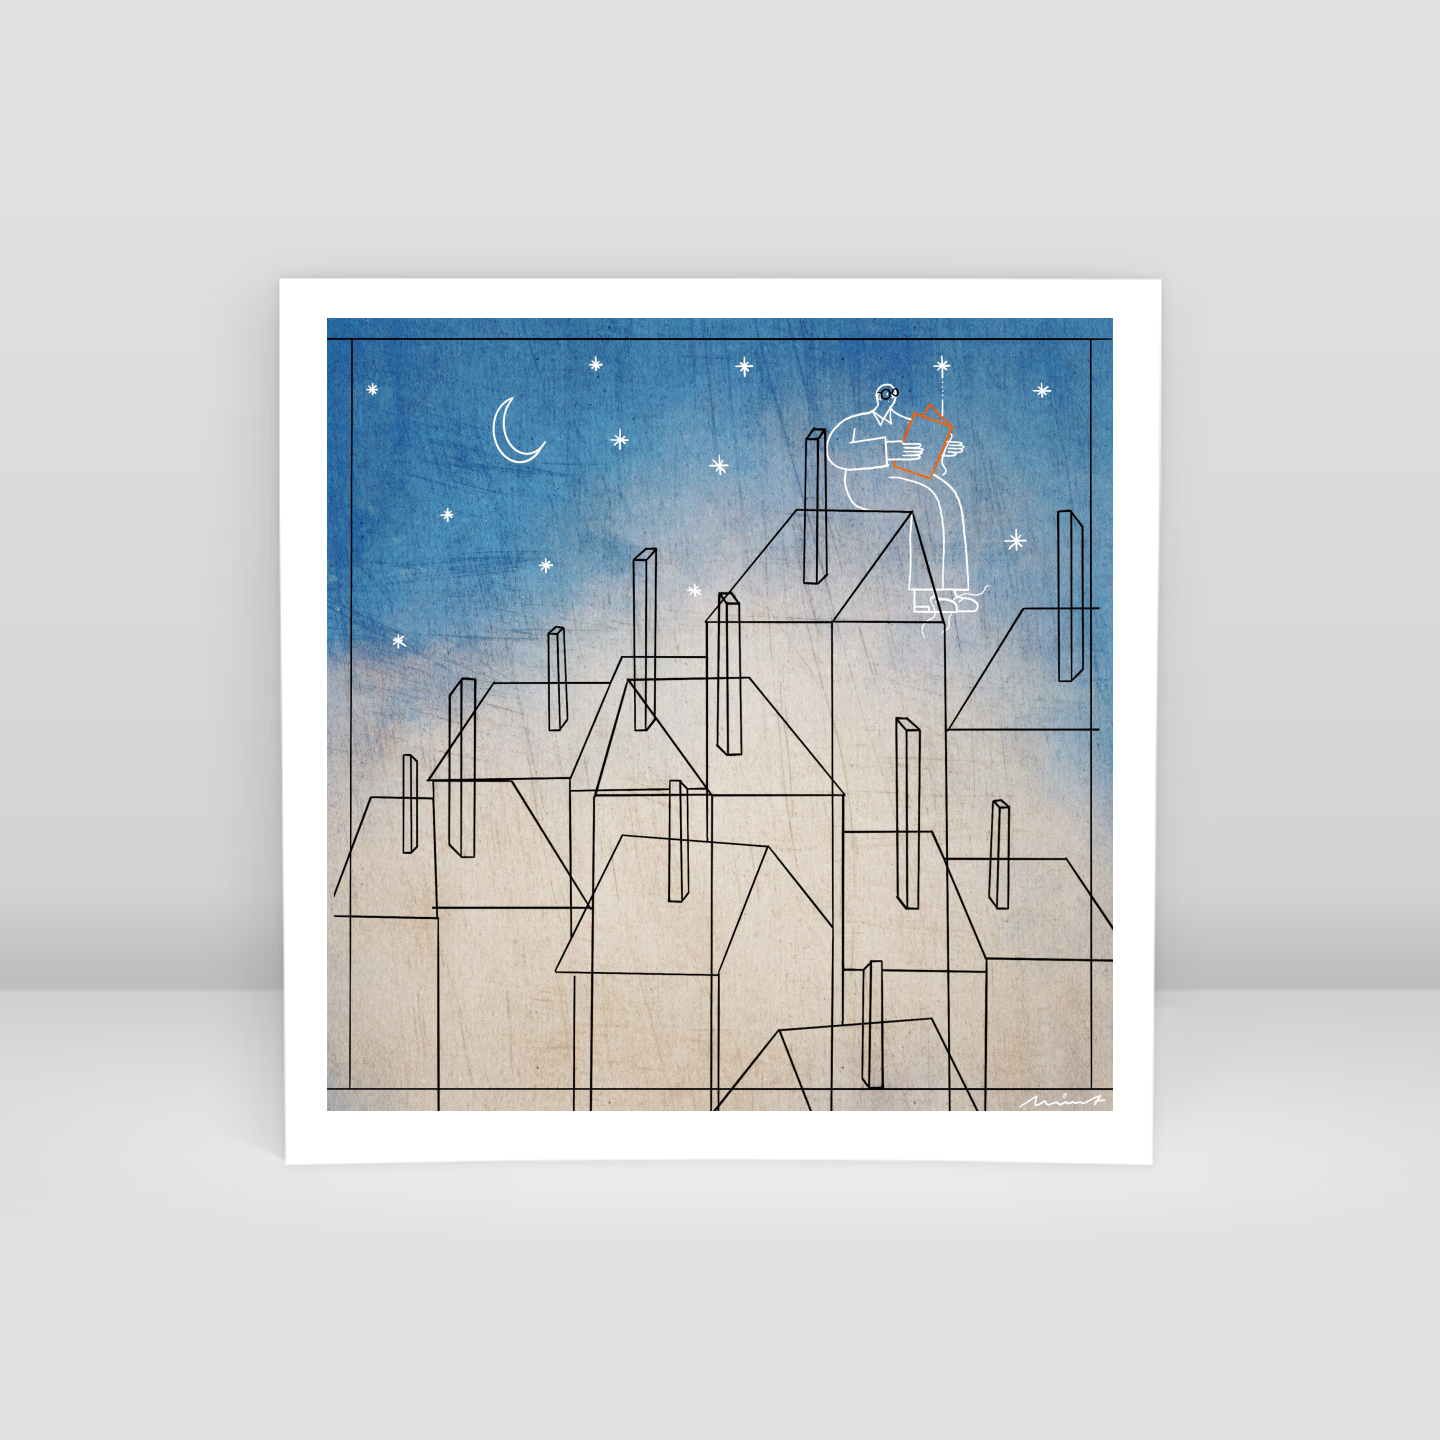 fly to high - Art Print